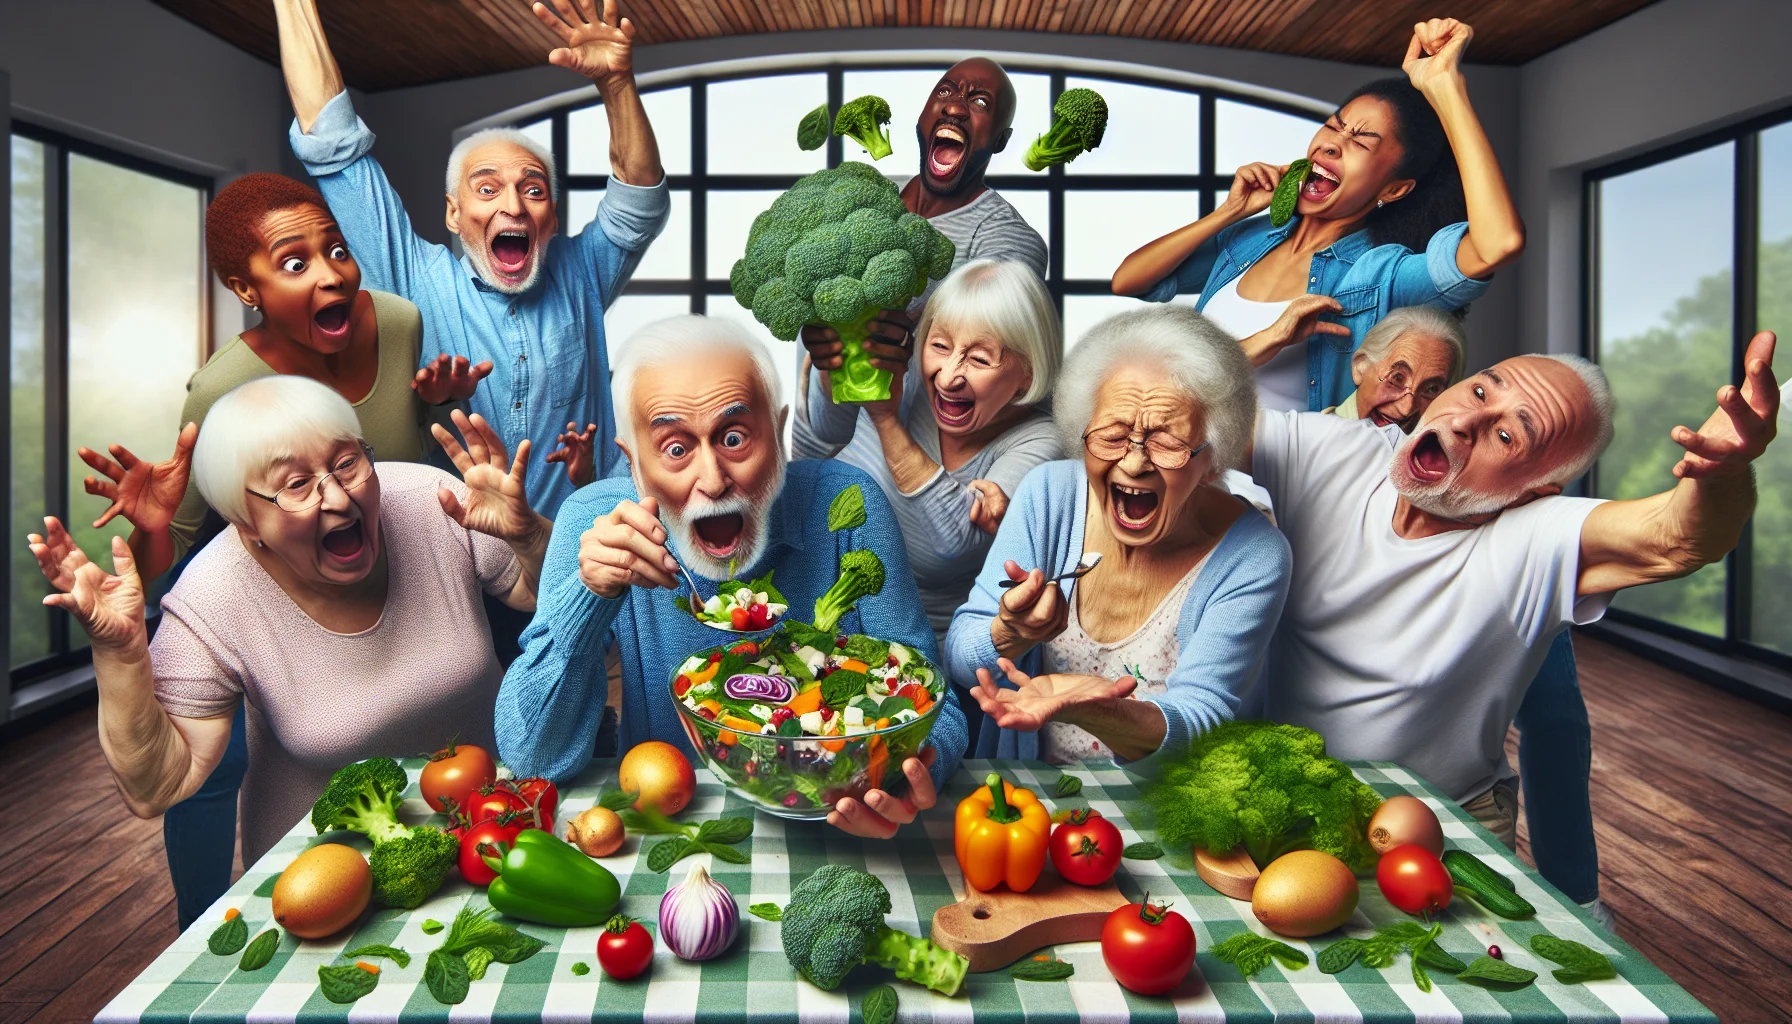 Create a humorous, realistic image of a scene at a healthy aging center. The center is filled with happily aged individuals from different descents - Caucasian, Hispanic, Black, Middle-Eastern, and South Asian. They all are engrossed in a playful challenge of preparing the most colorful, nutrient-rich salad. An elderly Black woman is triumphantly holding up a vibrant bowl of greens, while a Caucasian man pretends to faint dramatically at the sight of broccoli. A Middle-Eastern woman and a South Asian man are sharing a laugh as they try to balance precariously stacked vegetables. Each person showcasing their unique sense of fun and culinary skills in the pursuit of health and longevity.